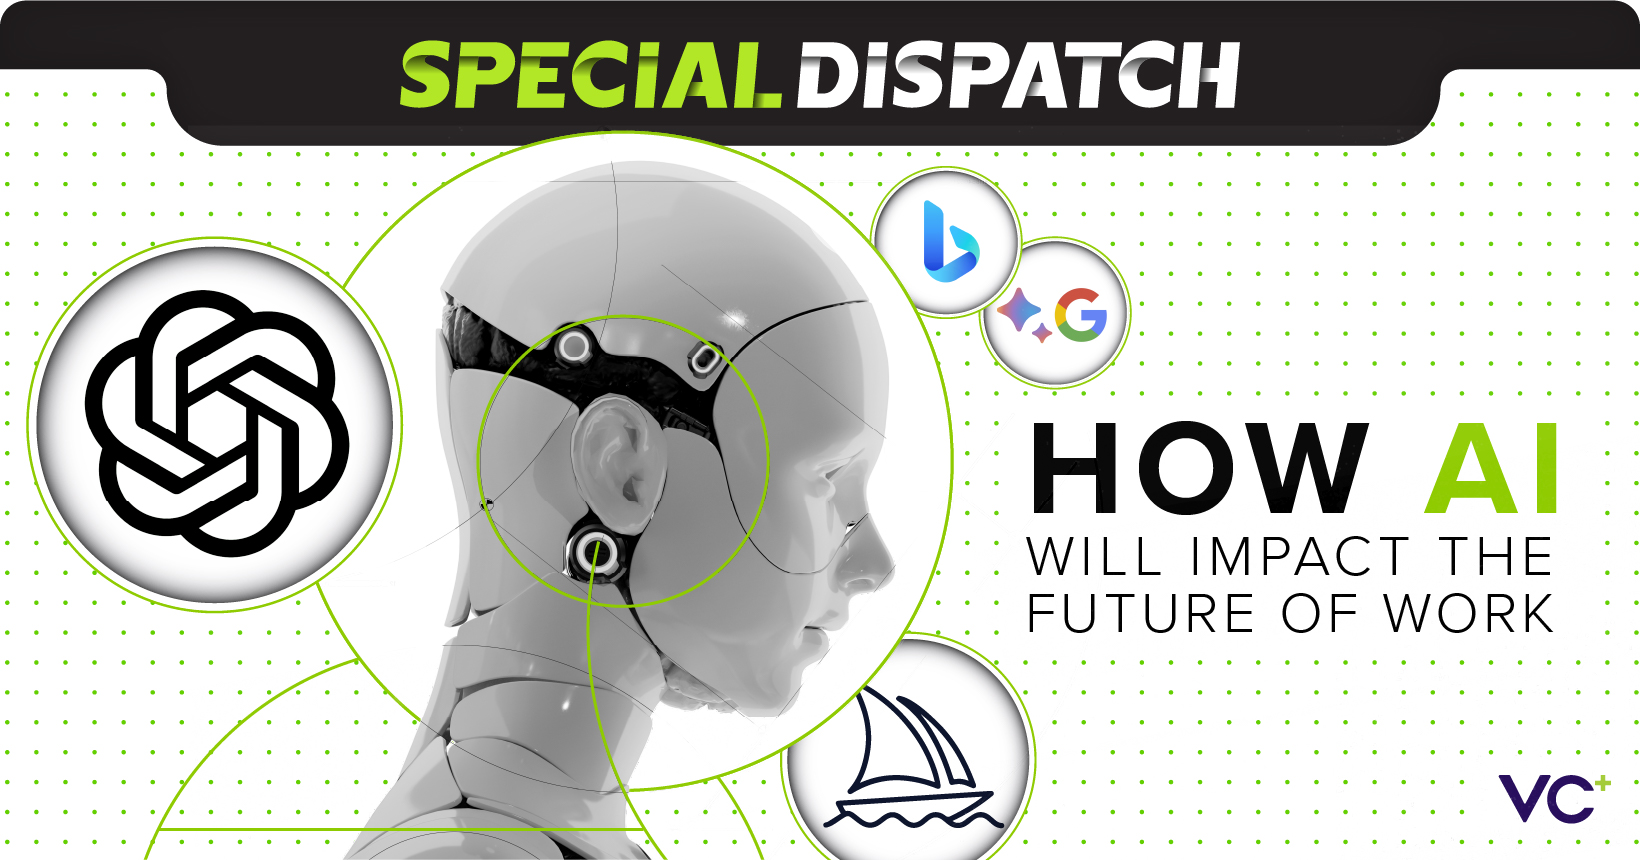 Promo image of a special dispatch about AI and the future of work featuring a humanoid robot surrounded by the ChatGPT logo, Midjourney logo, Bing logo, and Google Bard logo